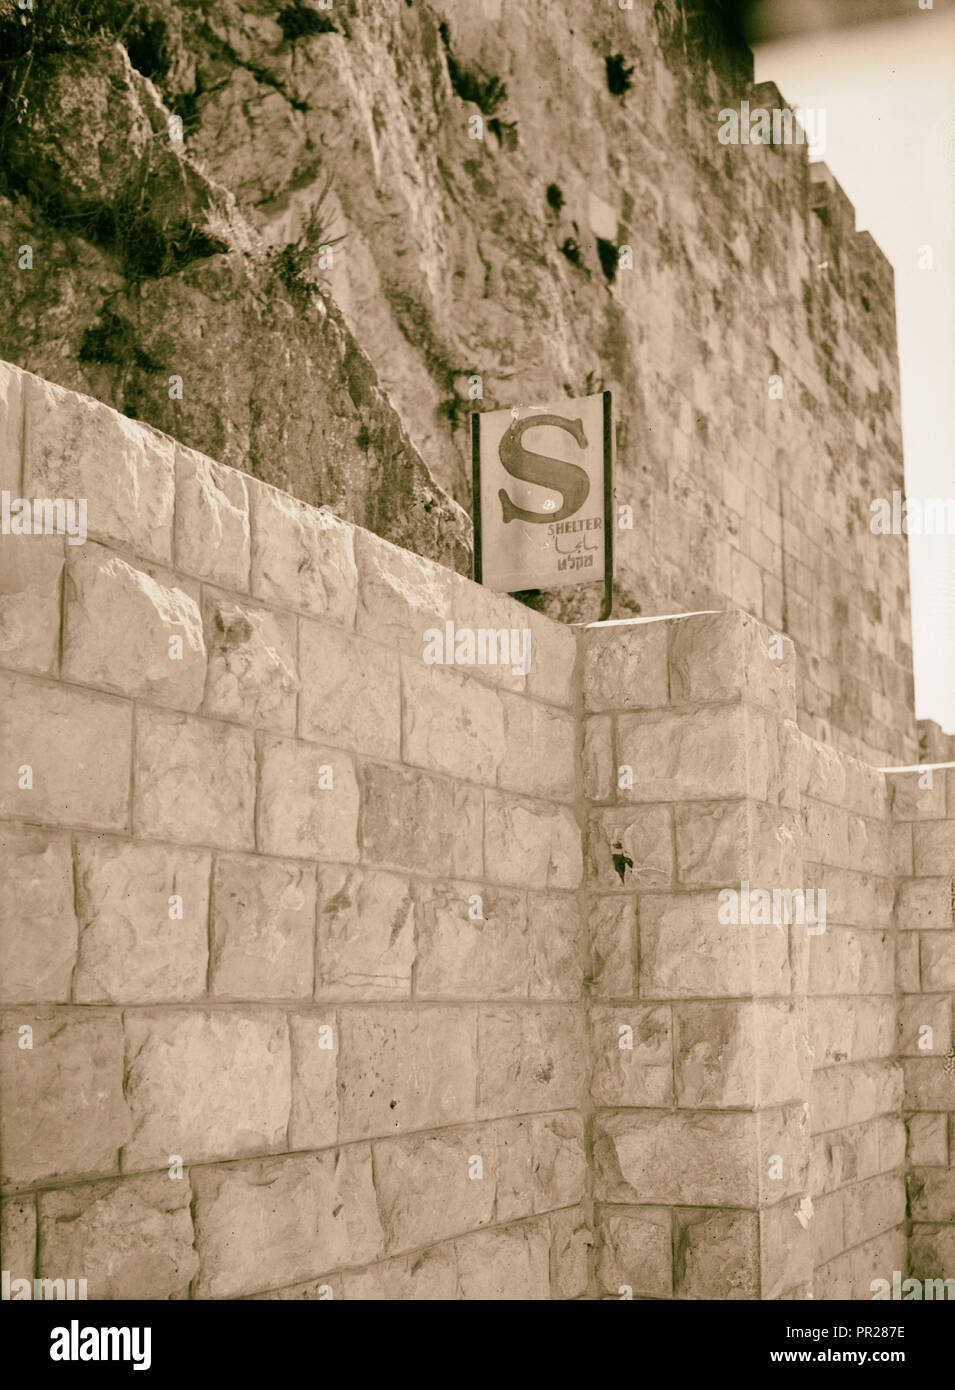 Air raid shelter at Solomon's Quarries, 1945. Photograph shows sign reading 'Shelter' in English, Hebrew and Arabic. 1945 Stock Photo